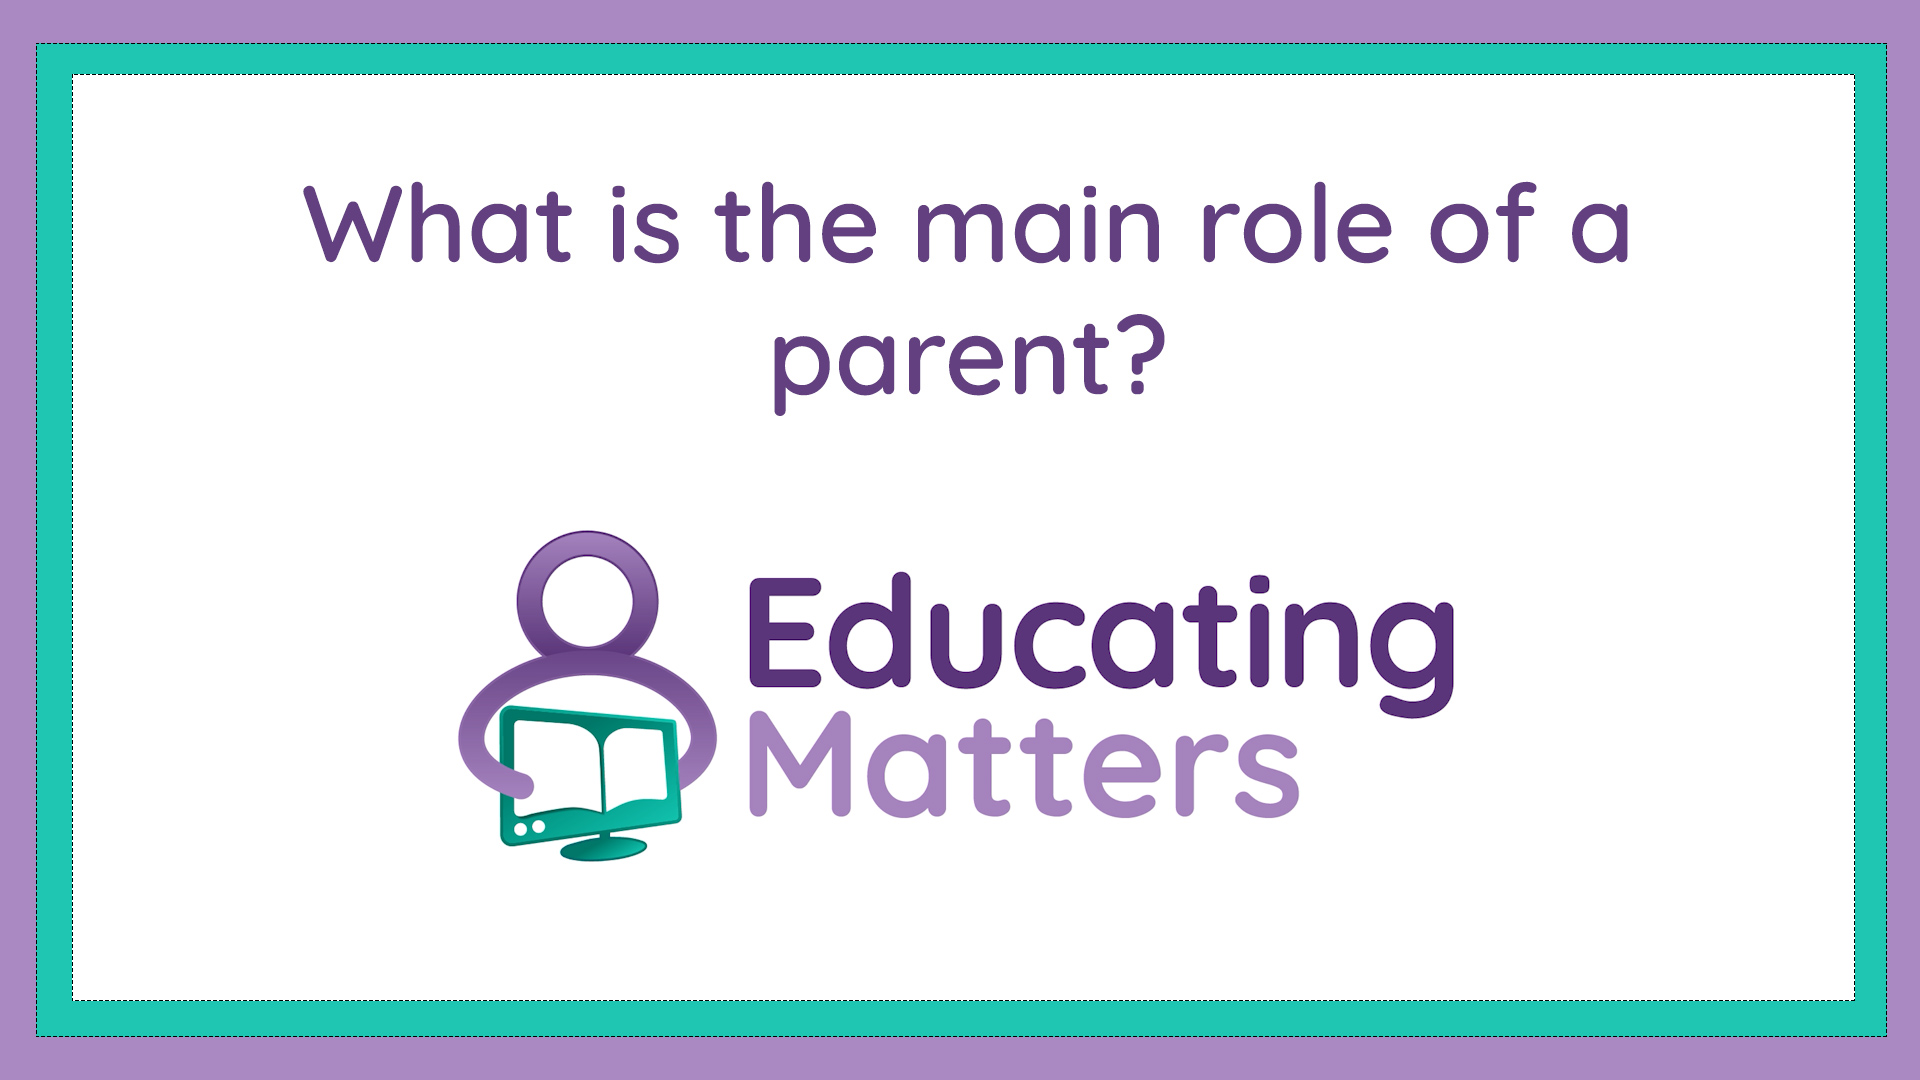 What is the main role of a parent?